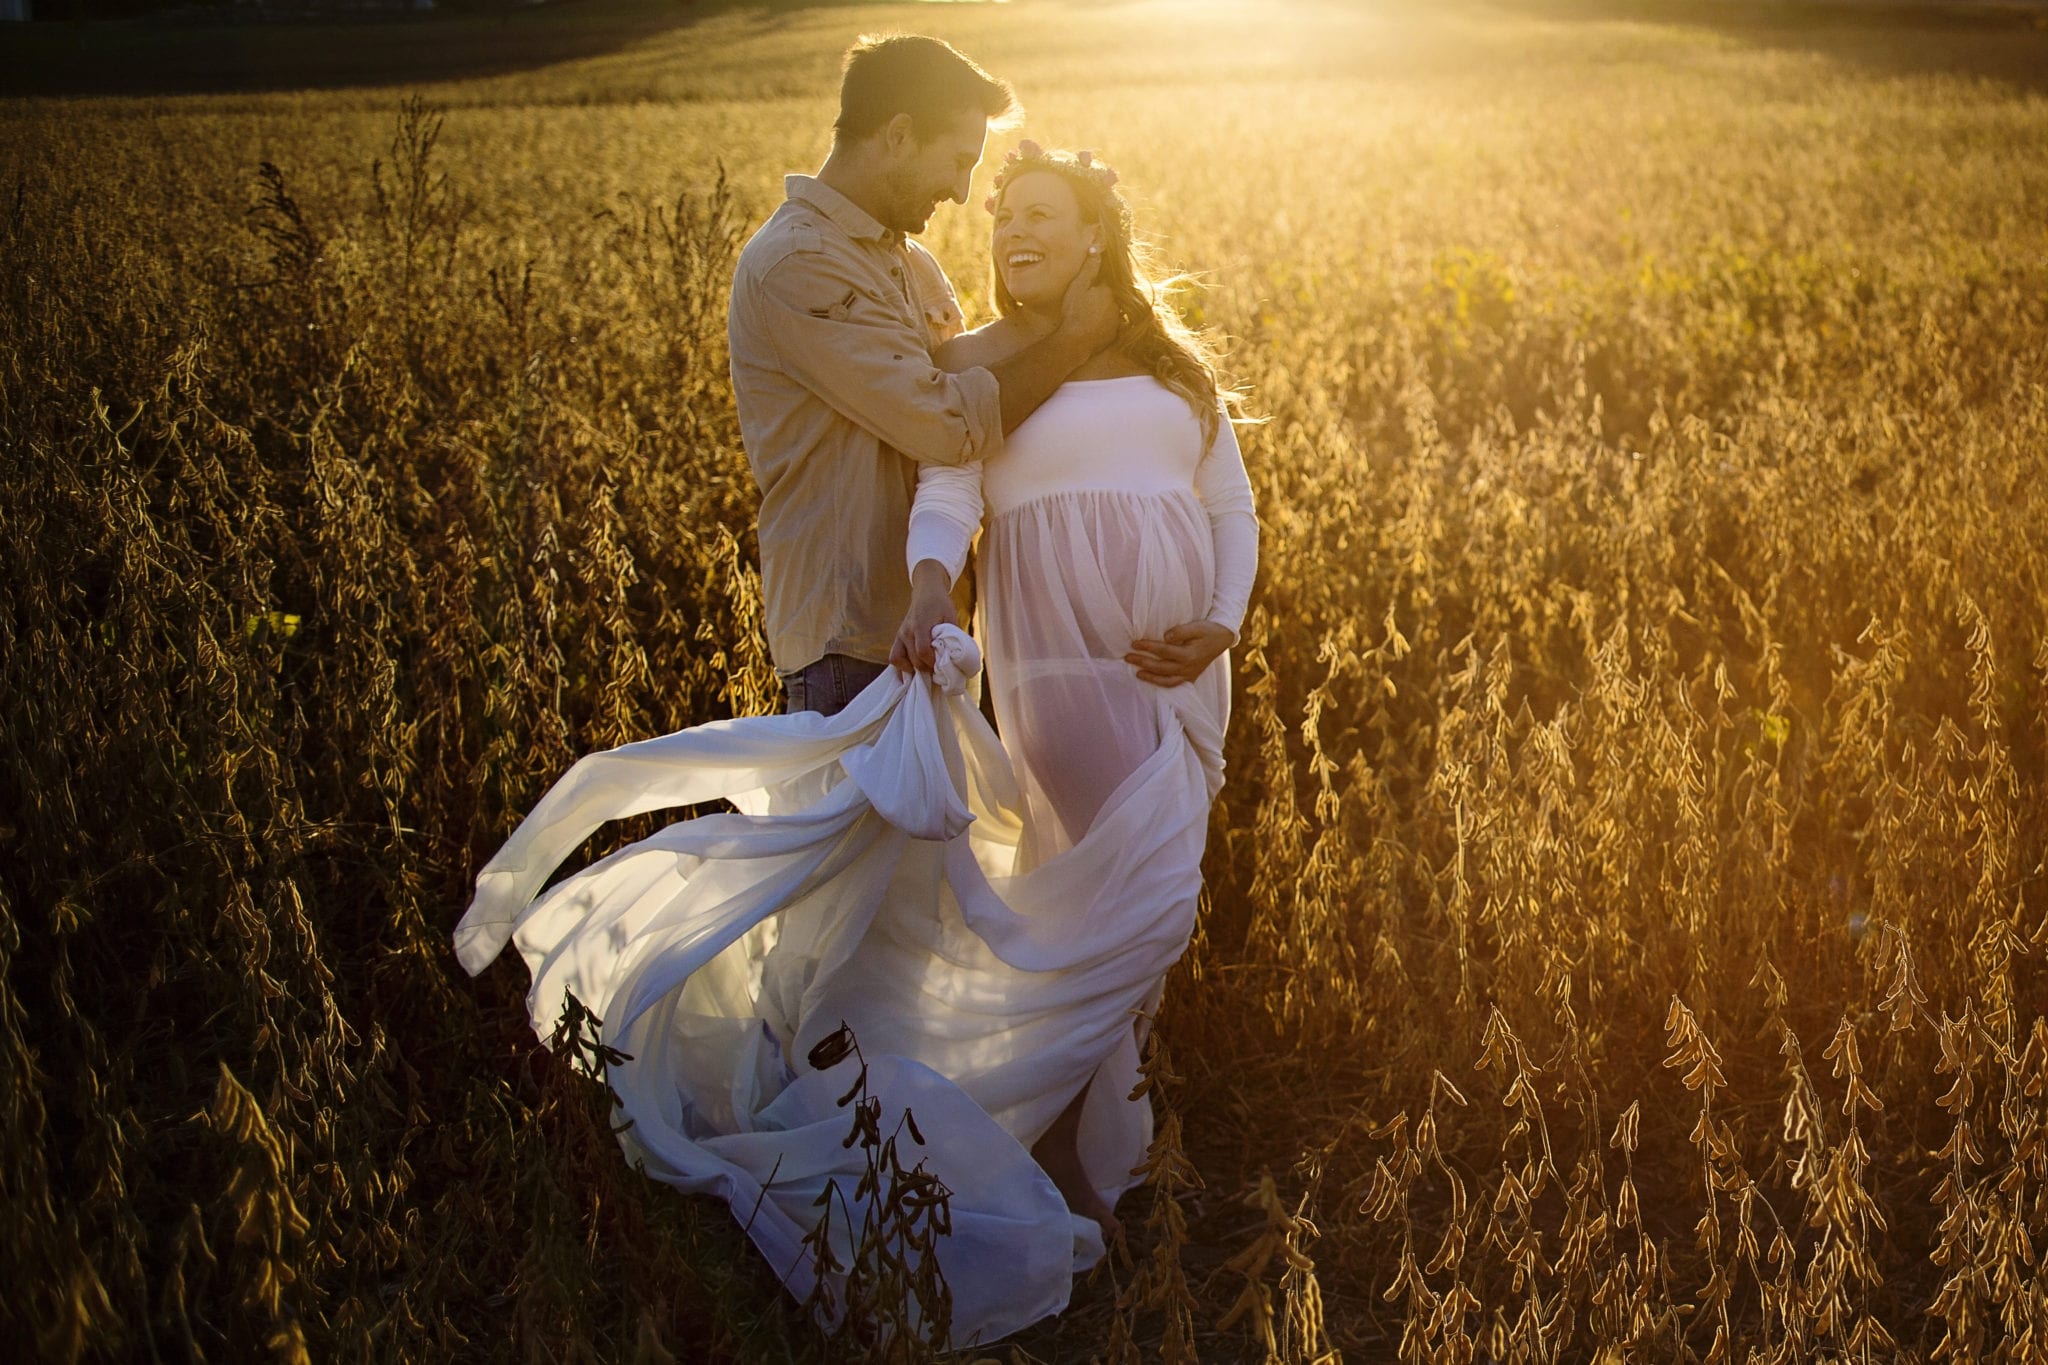 pregnant woman in billowing white maternity dress in soy field looks at man touching her neck